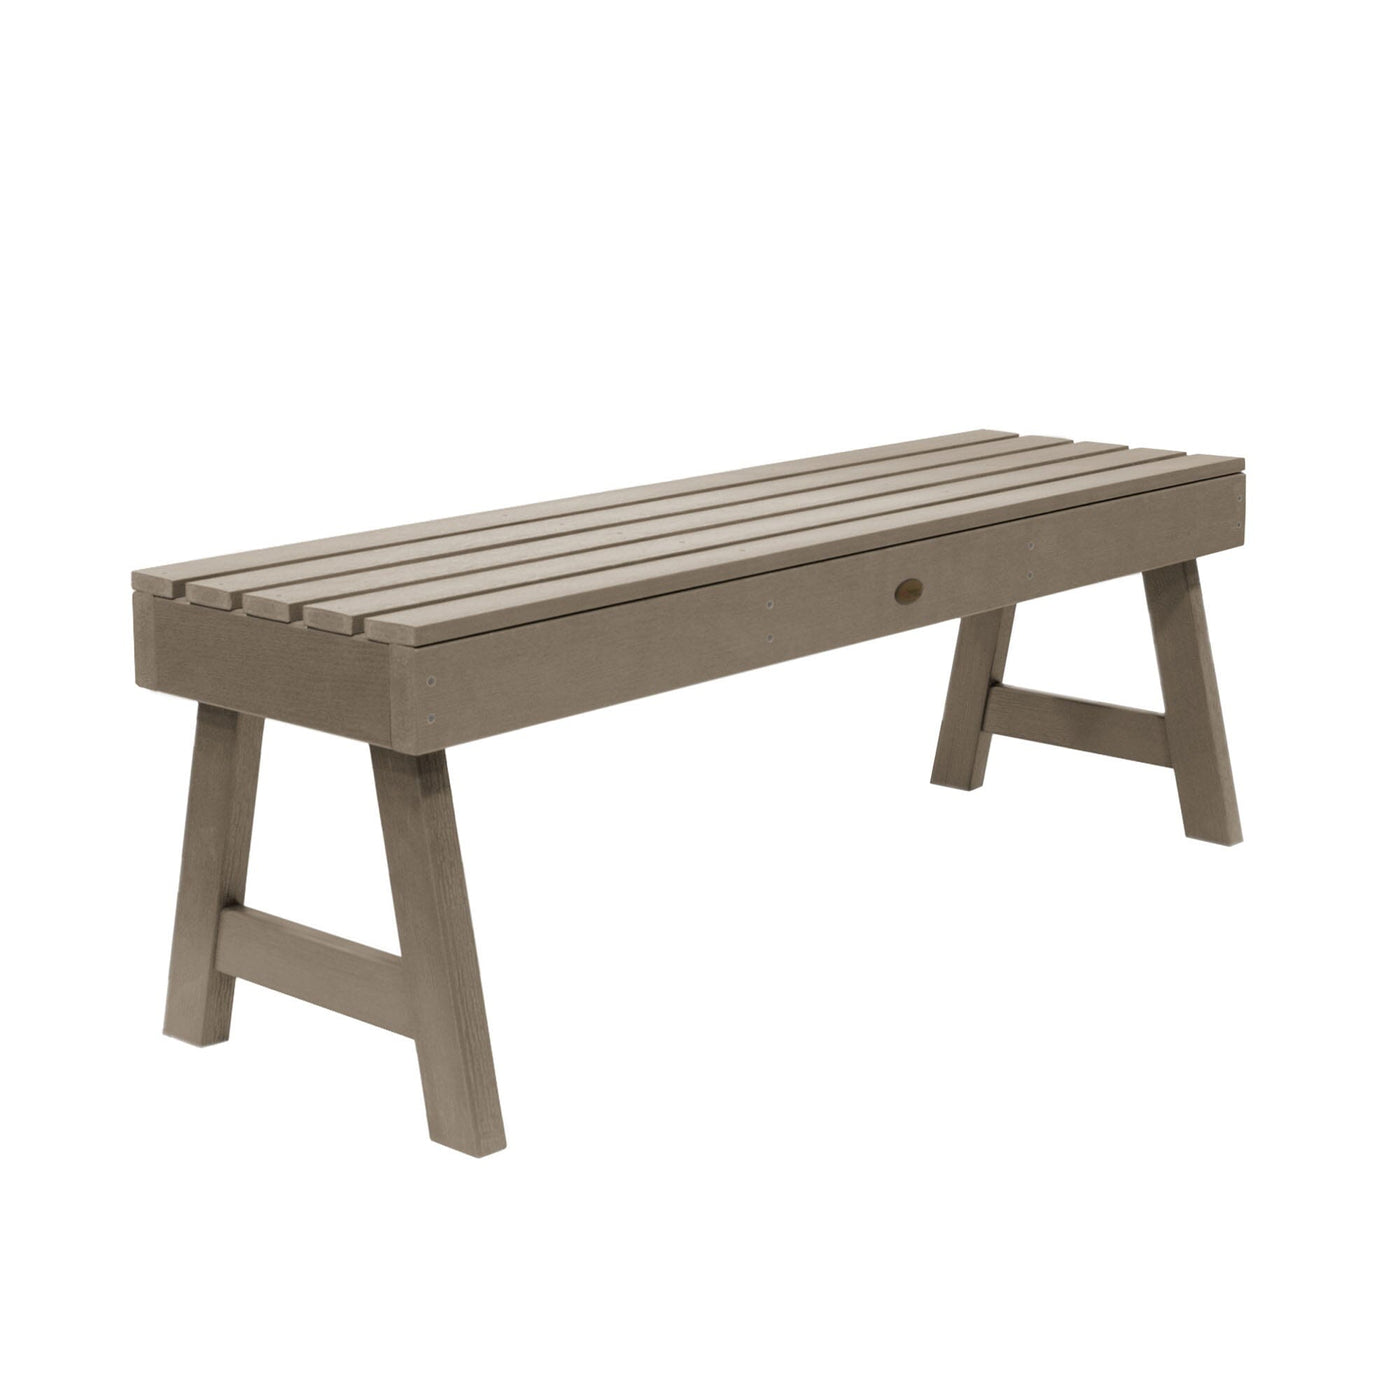 Weatherly Picnic Backless Bench - 4ft Bench Highwood USA Woodland Brown 